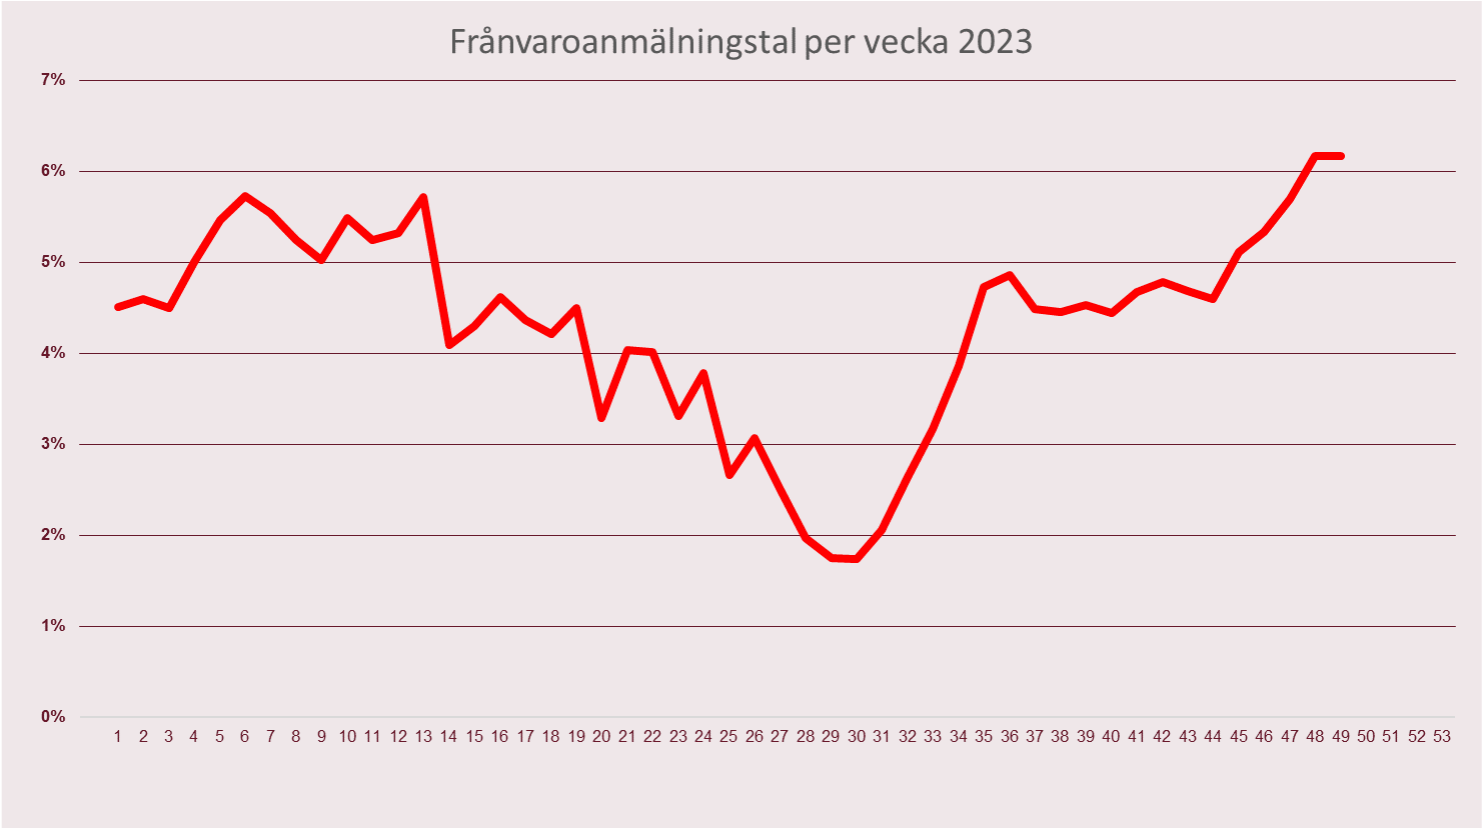 Chart showing the absence registration rate in % per week in 2023